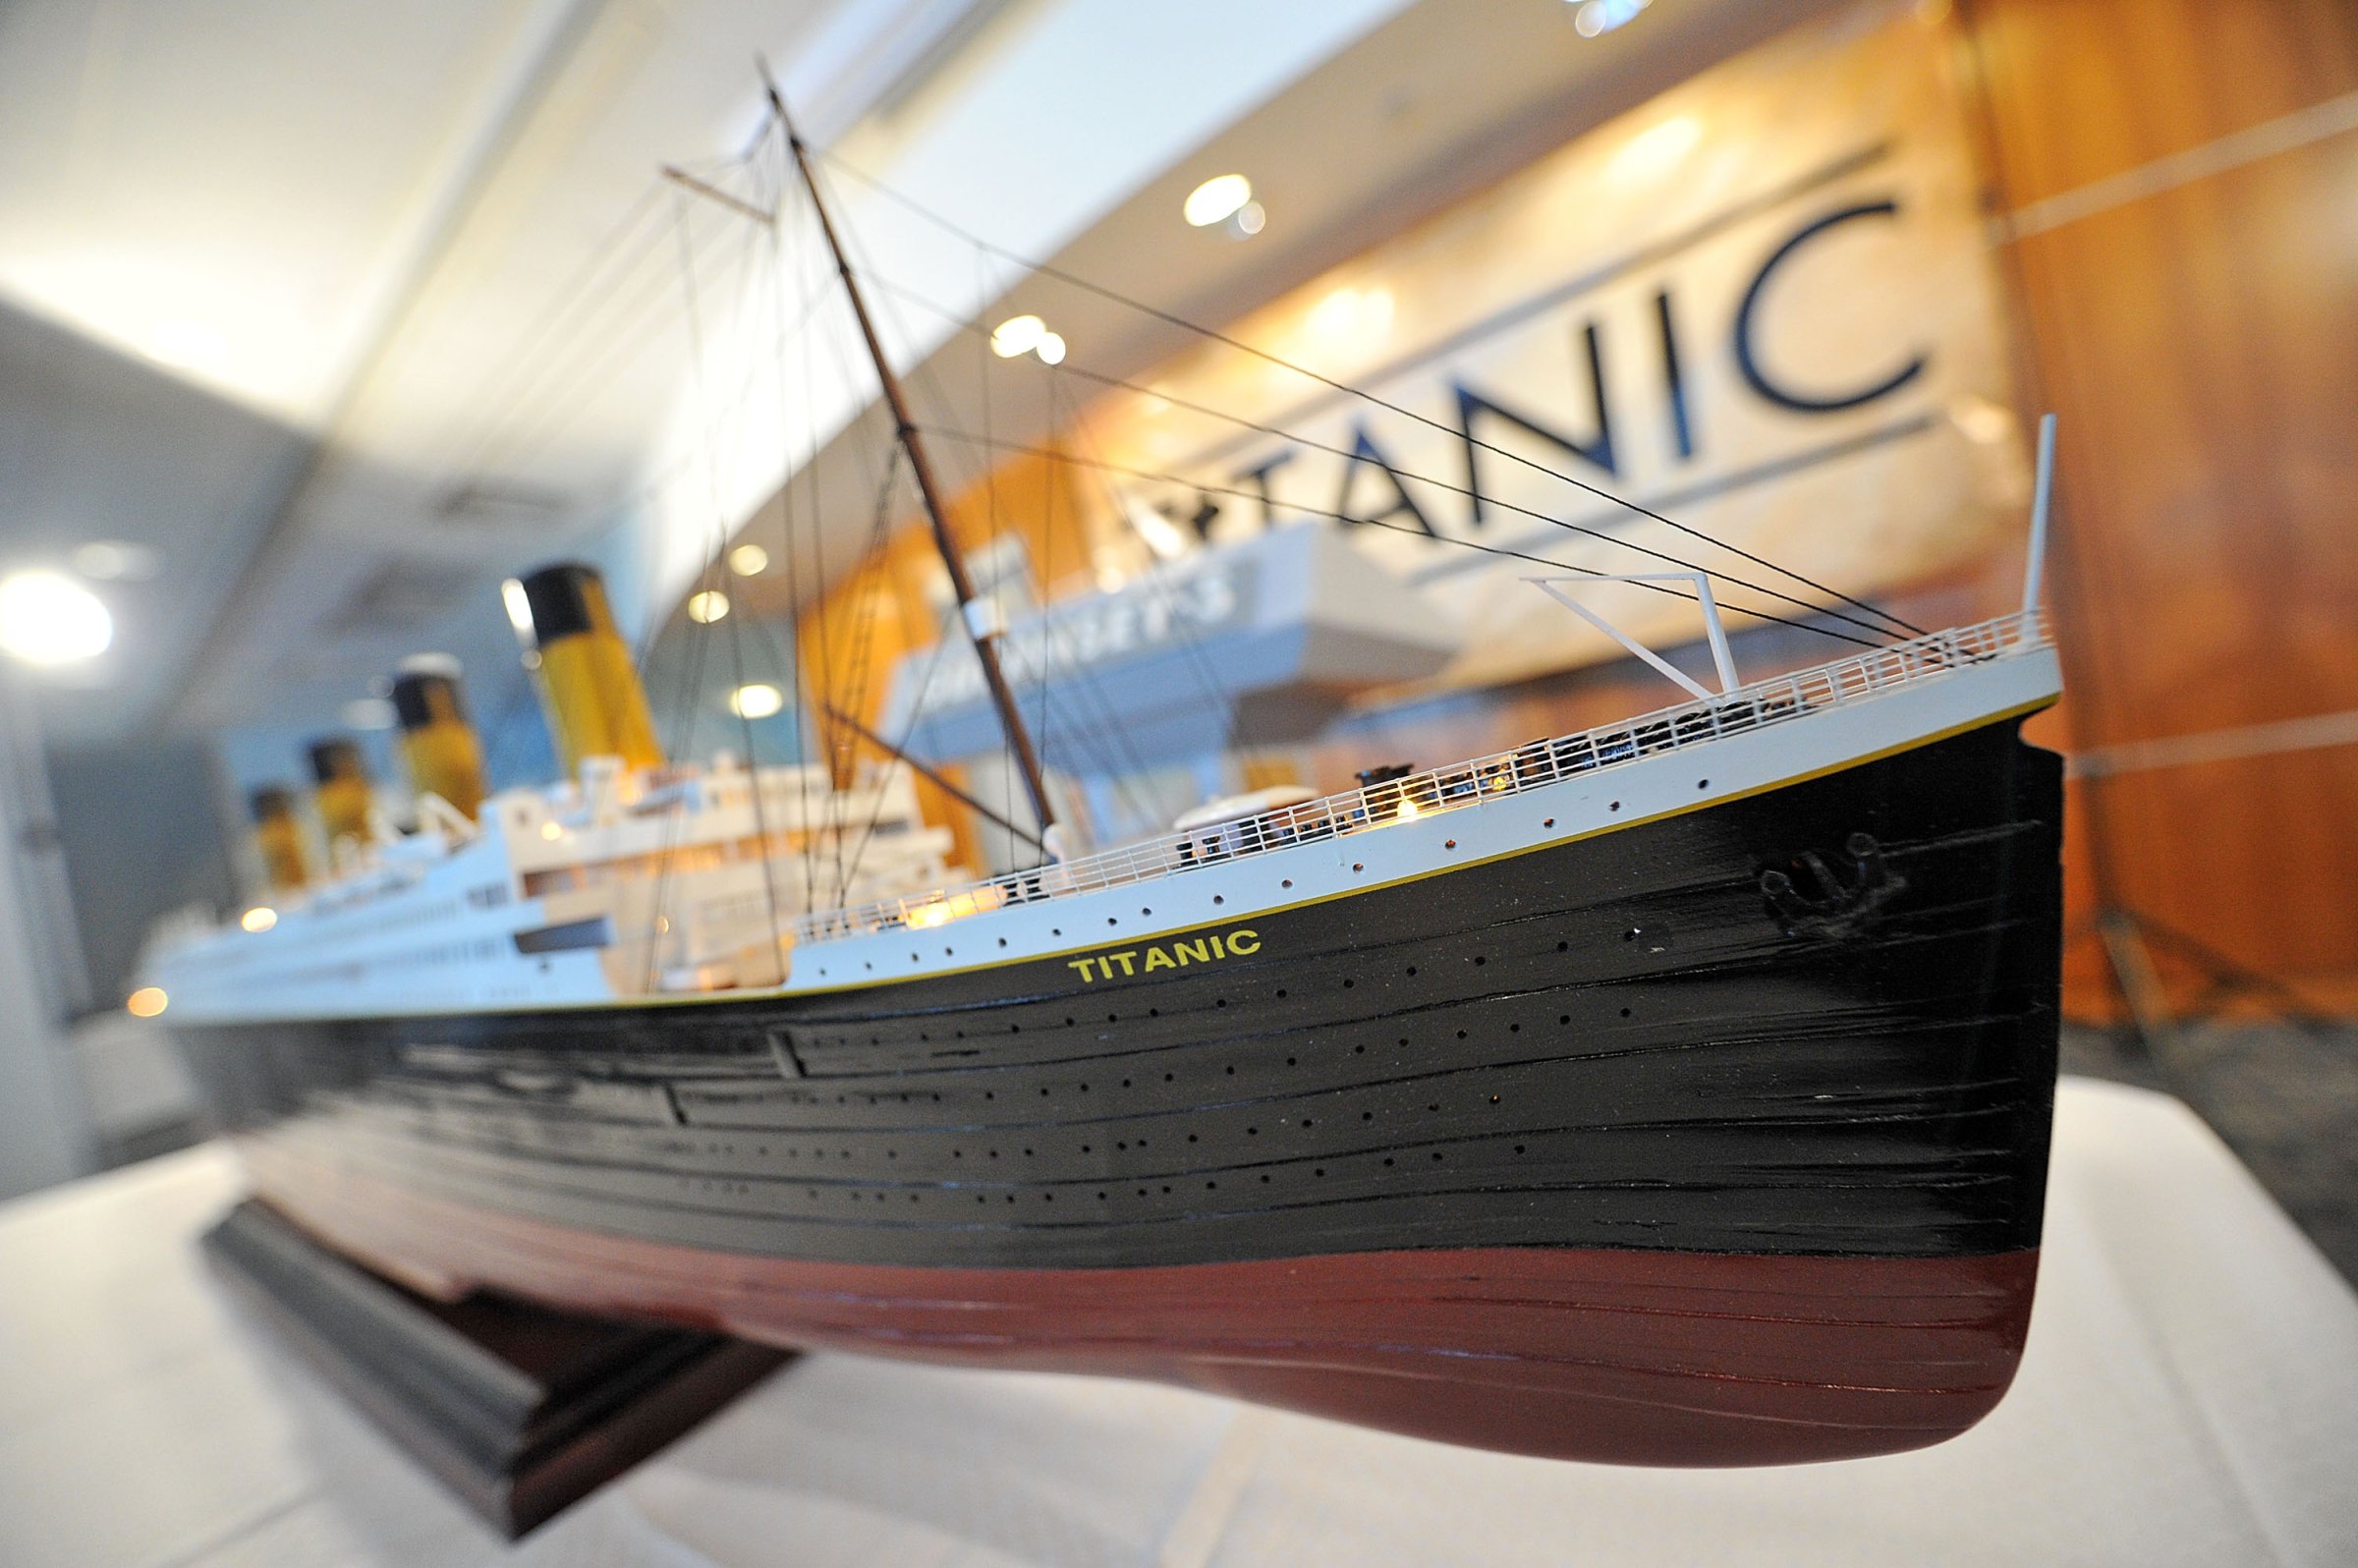 A scale model of the RMS Titanic on display at the Titanic Auction preview at the Intrepid Sea-Air-Space Museum on January 5, 2012 in New York City.